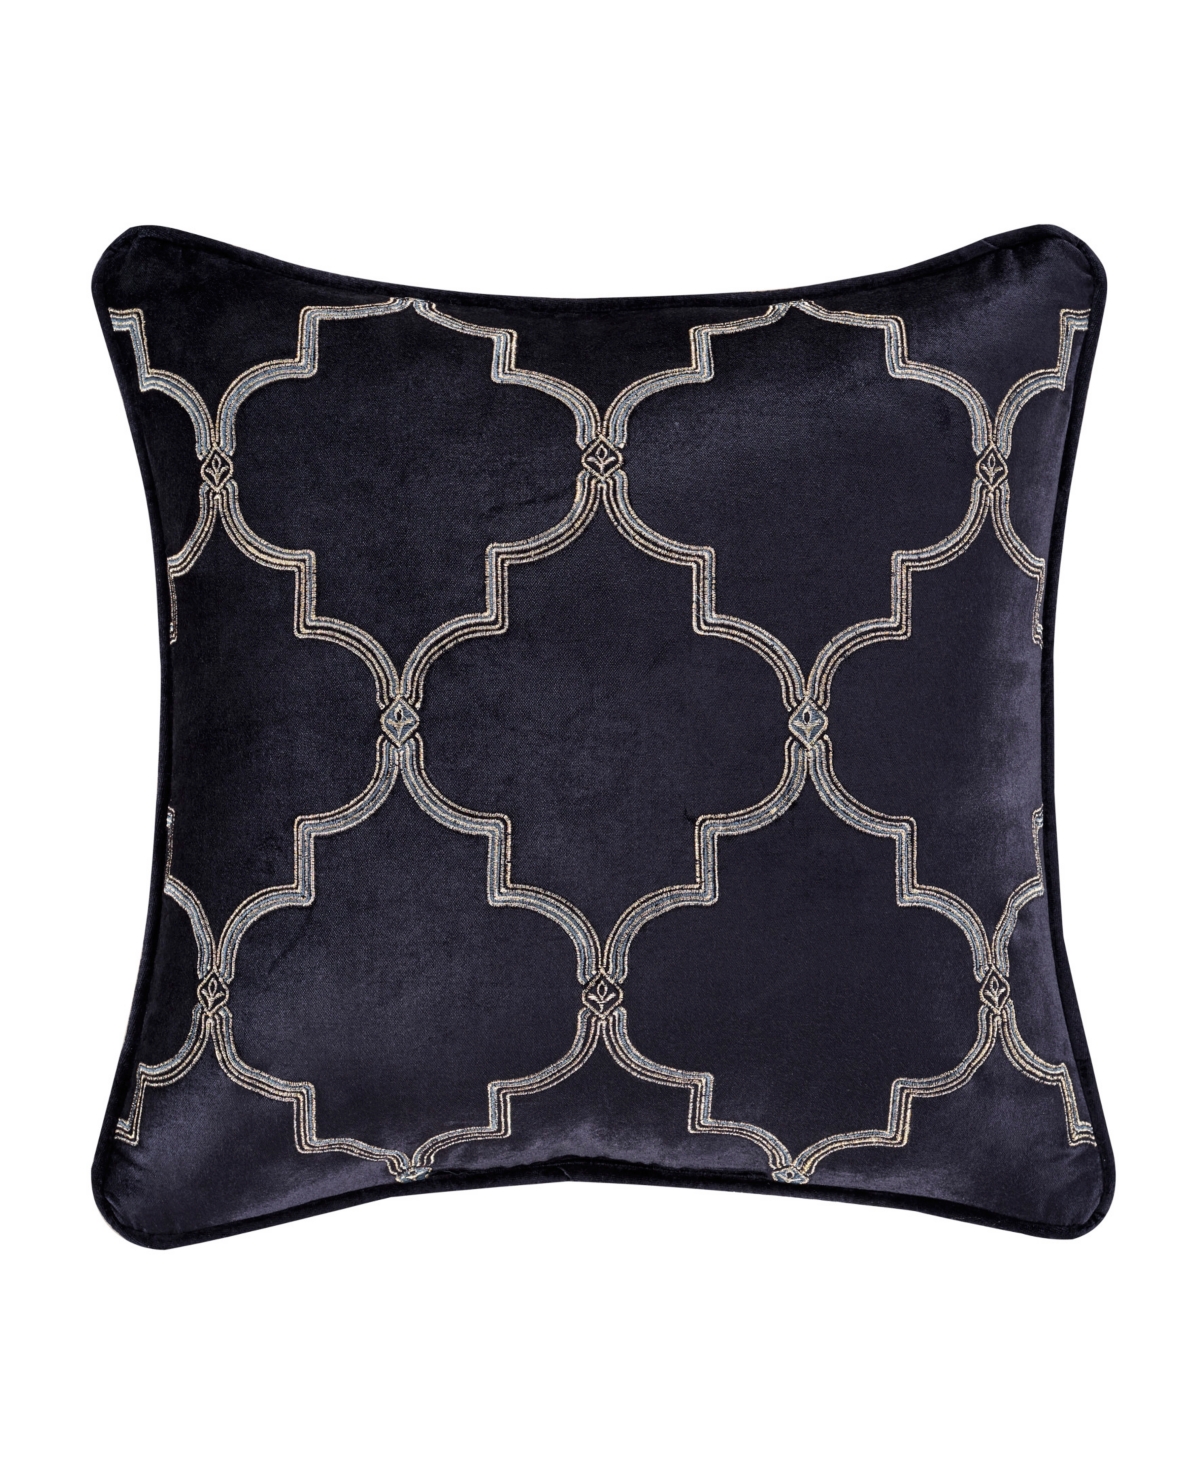 J Queen New York Middlebury Square Embellished Decorative Pillow, 18" X 18" In Indigo